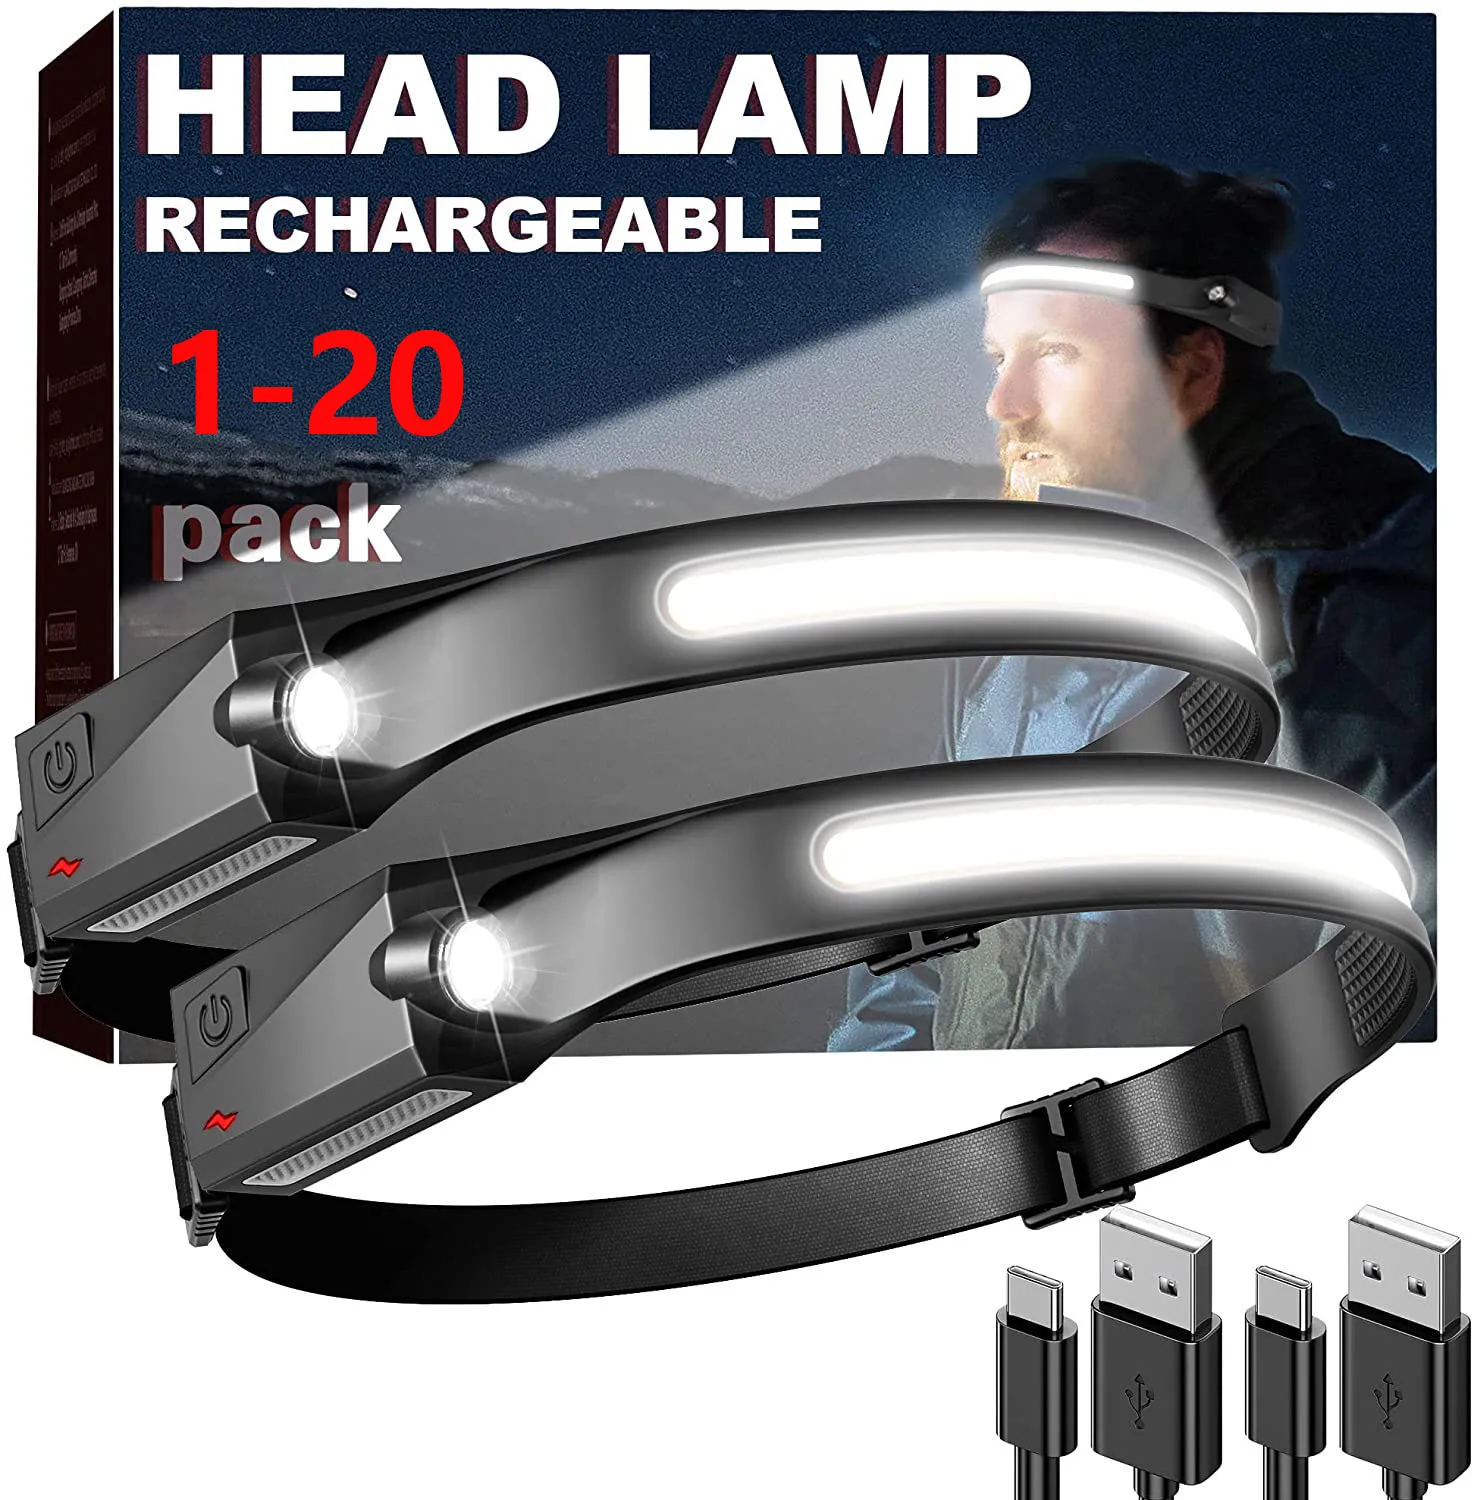 1-20PCS LED headlamp rechargeable headlight 230 ° wide beam head lamp  5 modes head light head flash light suitable for camping